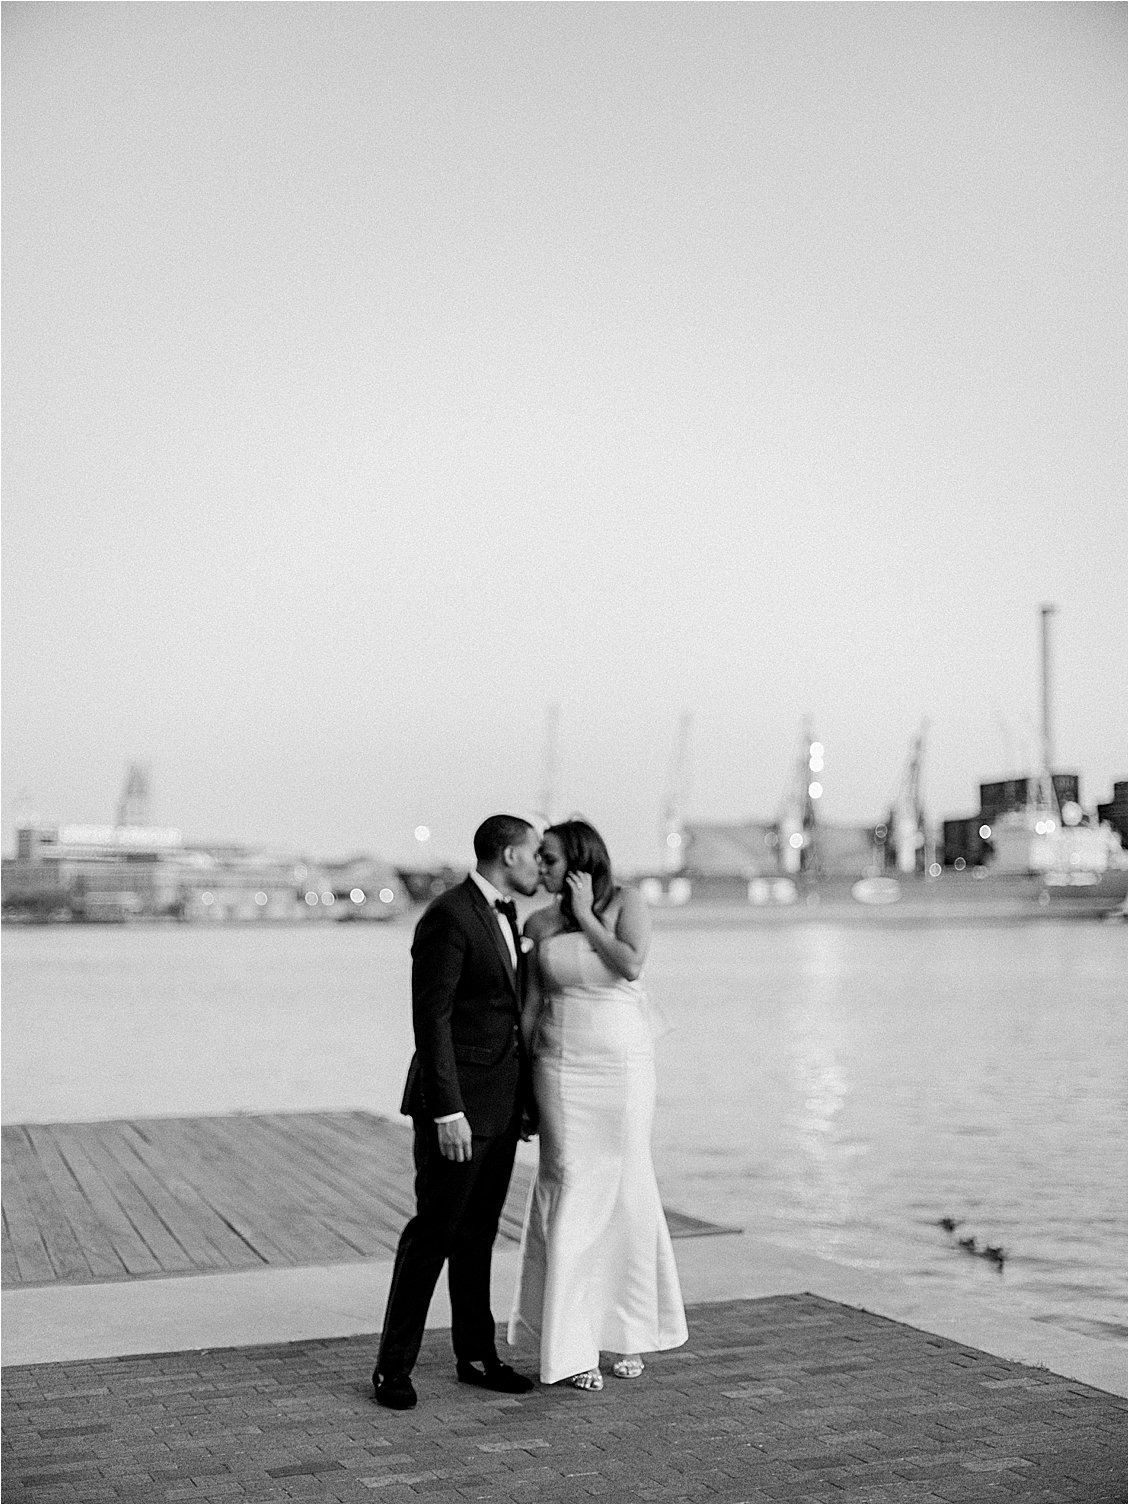 Black Tie Anniversary Session in Fells Point Waterfront with Destination Film Wedding Photographer, Renee Hollingshead